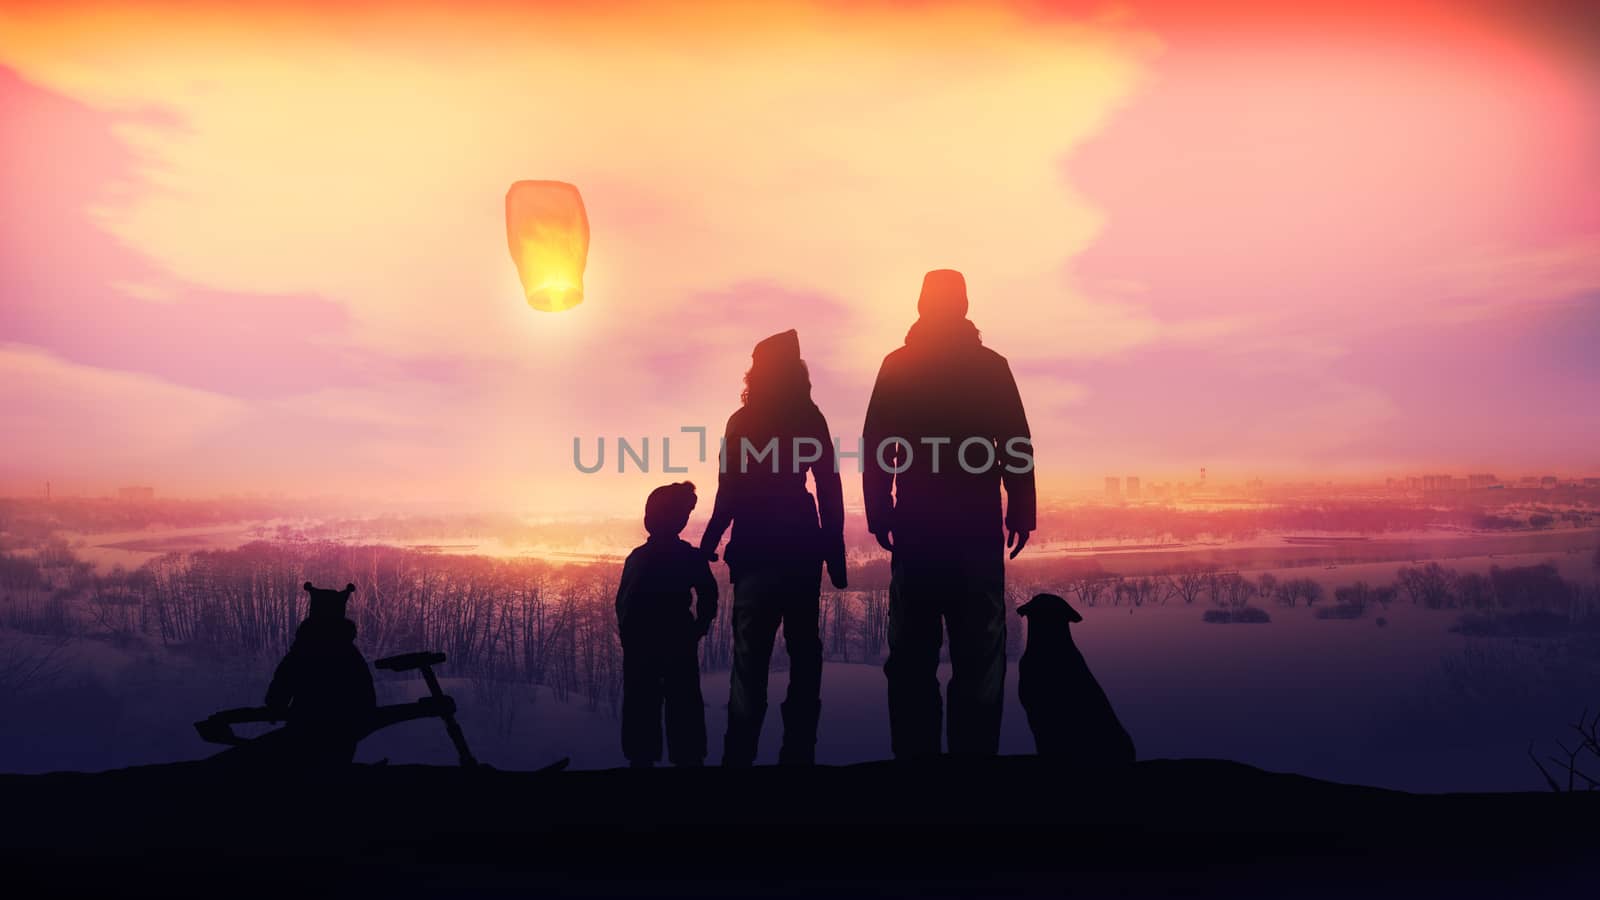 A family standing on a hill is launching a Chinese lantern on the background of a winter landscape at sunset.